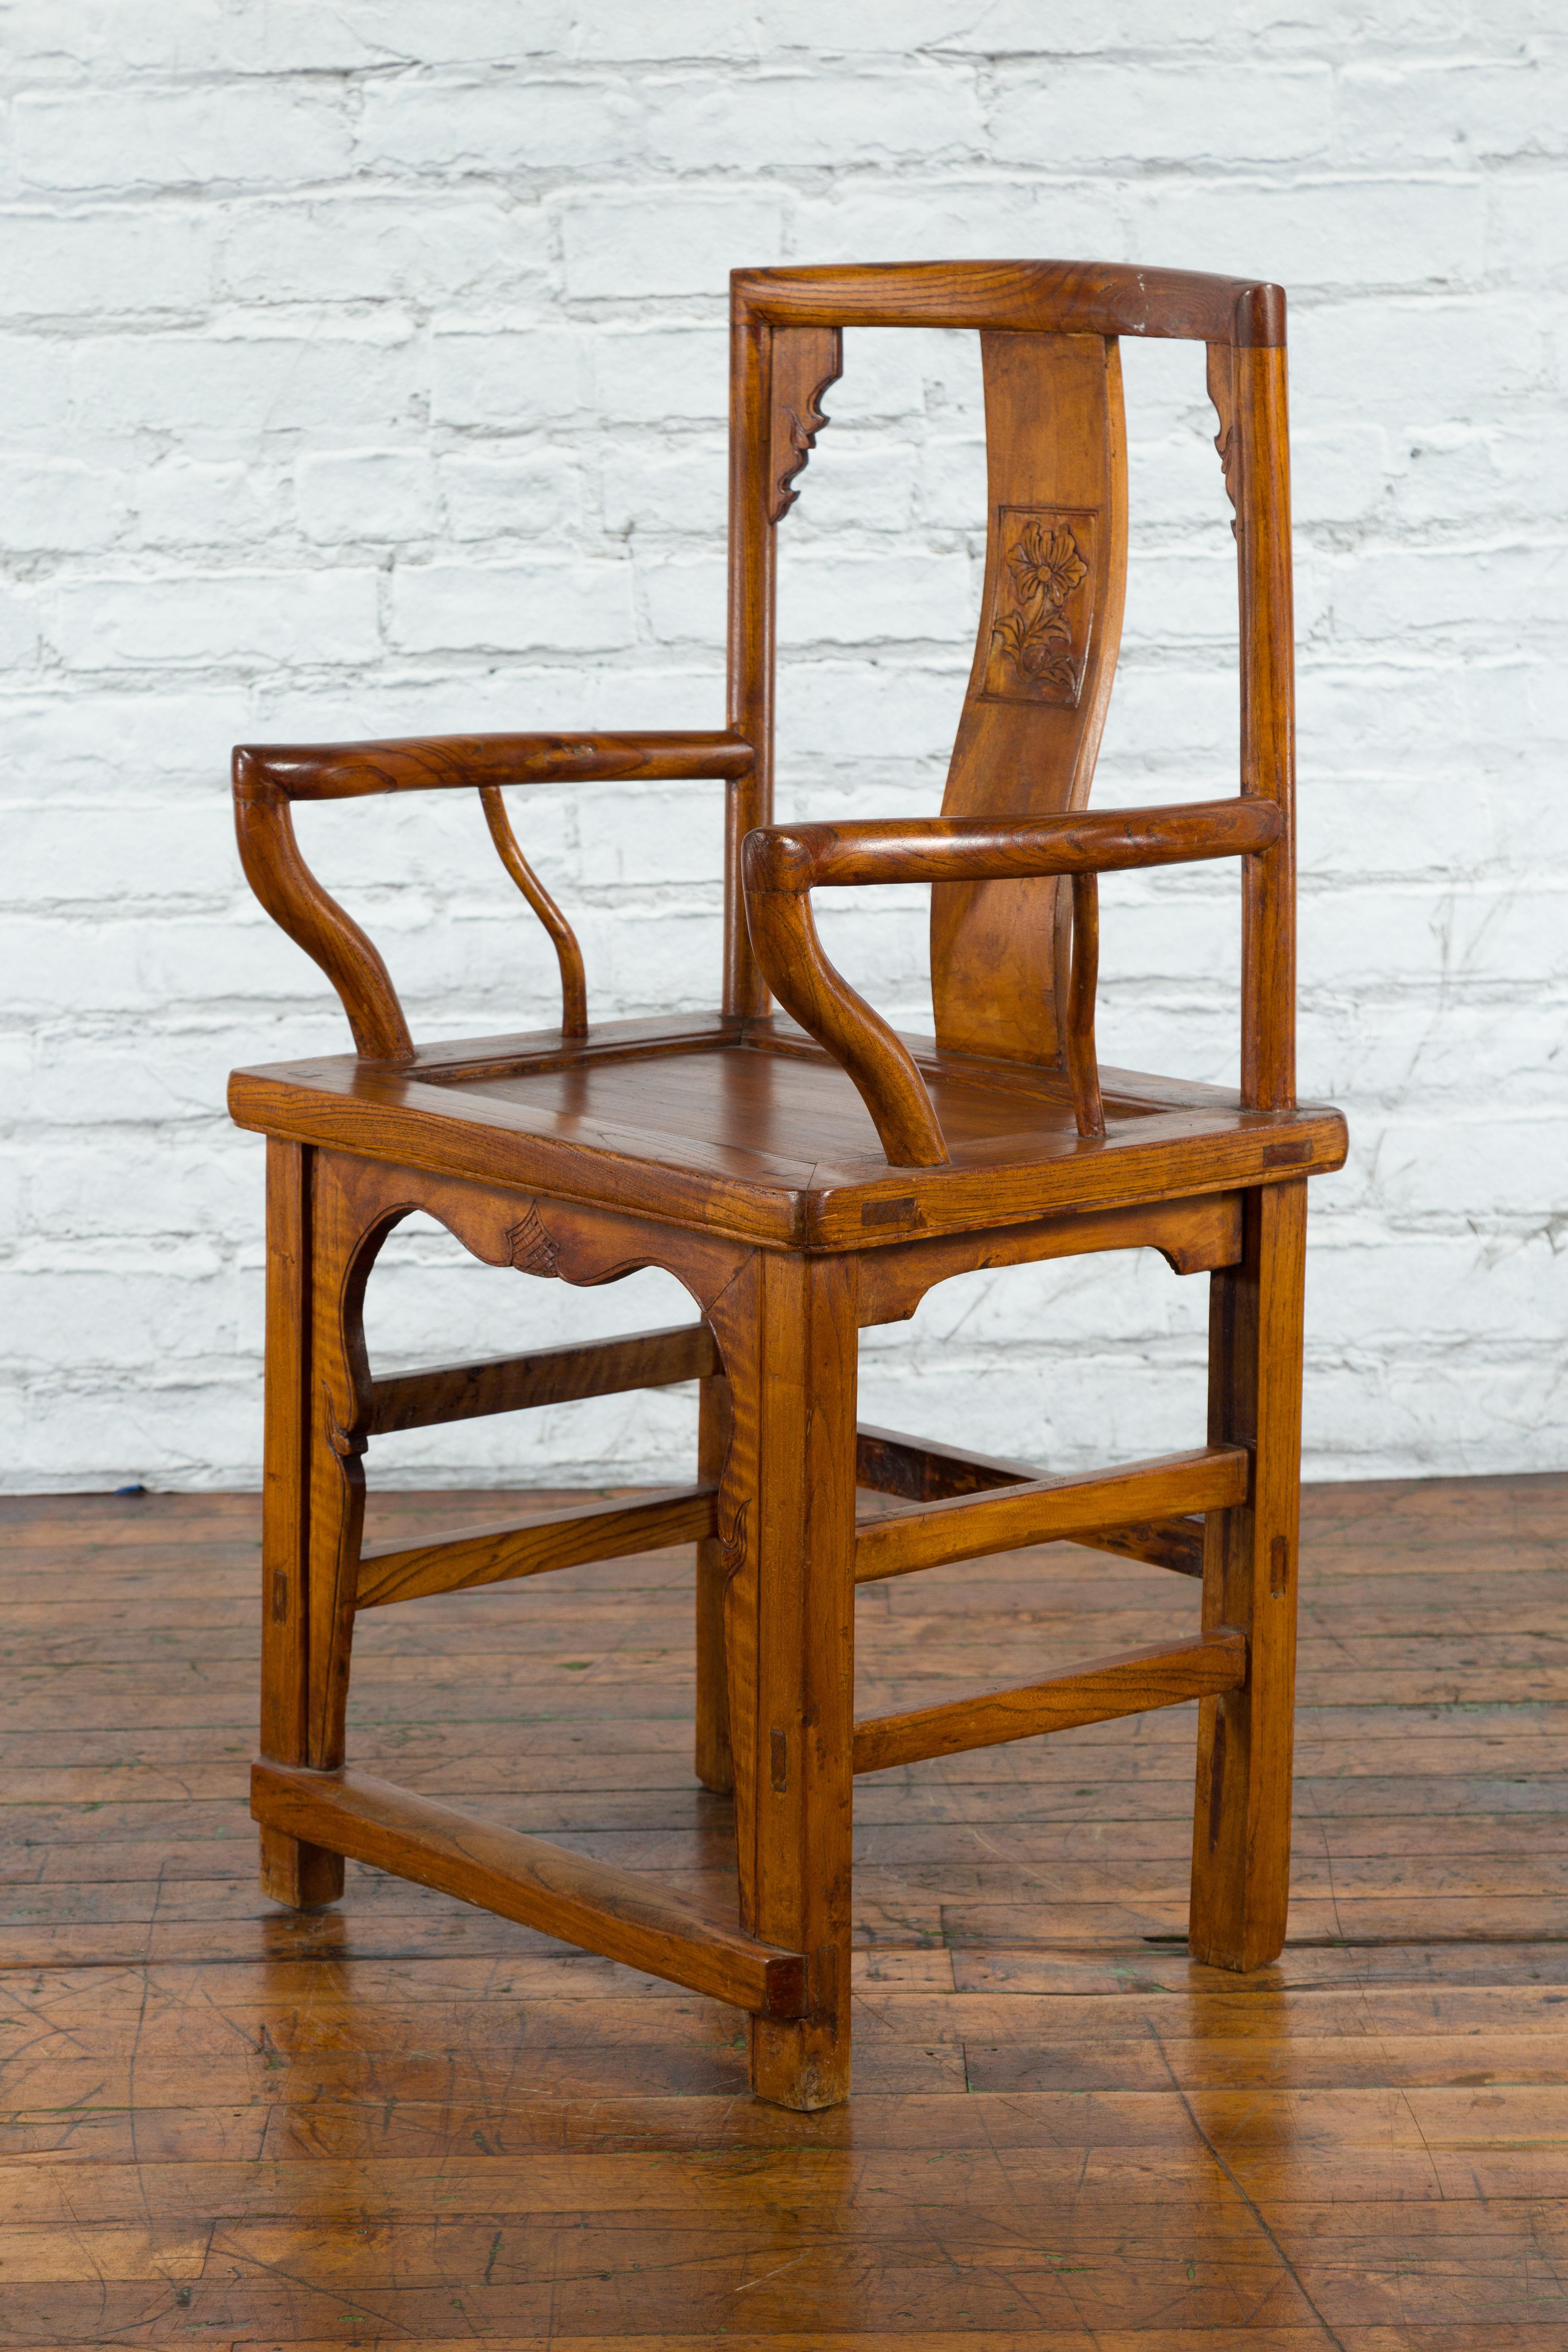 Chinese 19th Century Qing Chair with Open Arms and Hand-Carved Floral Motifs In Good Condition For Sale In Yonkers, NY